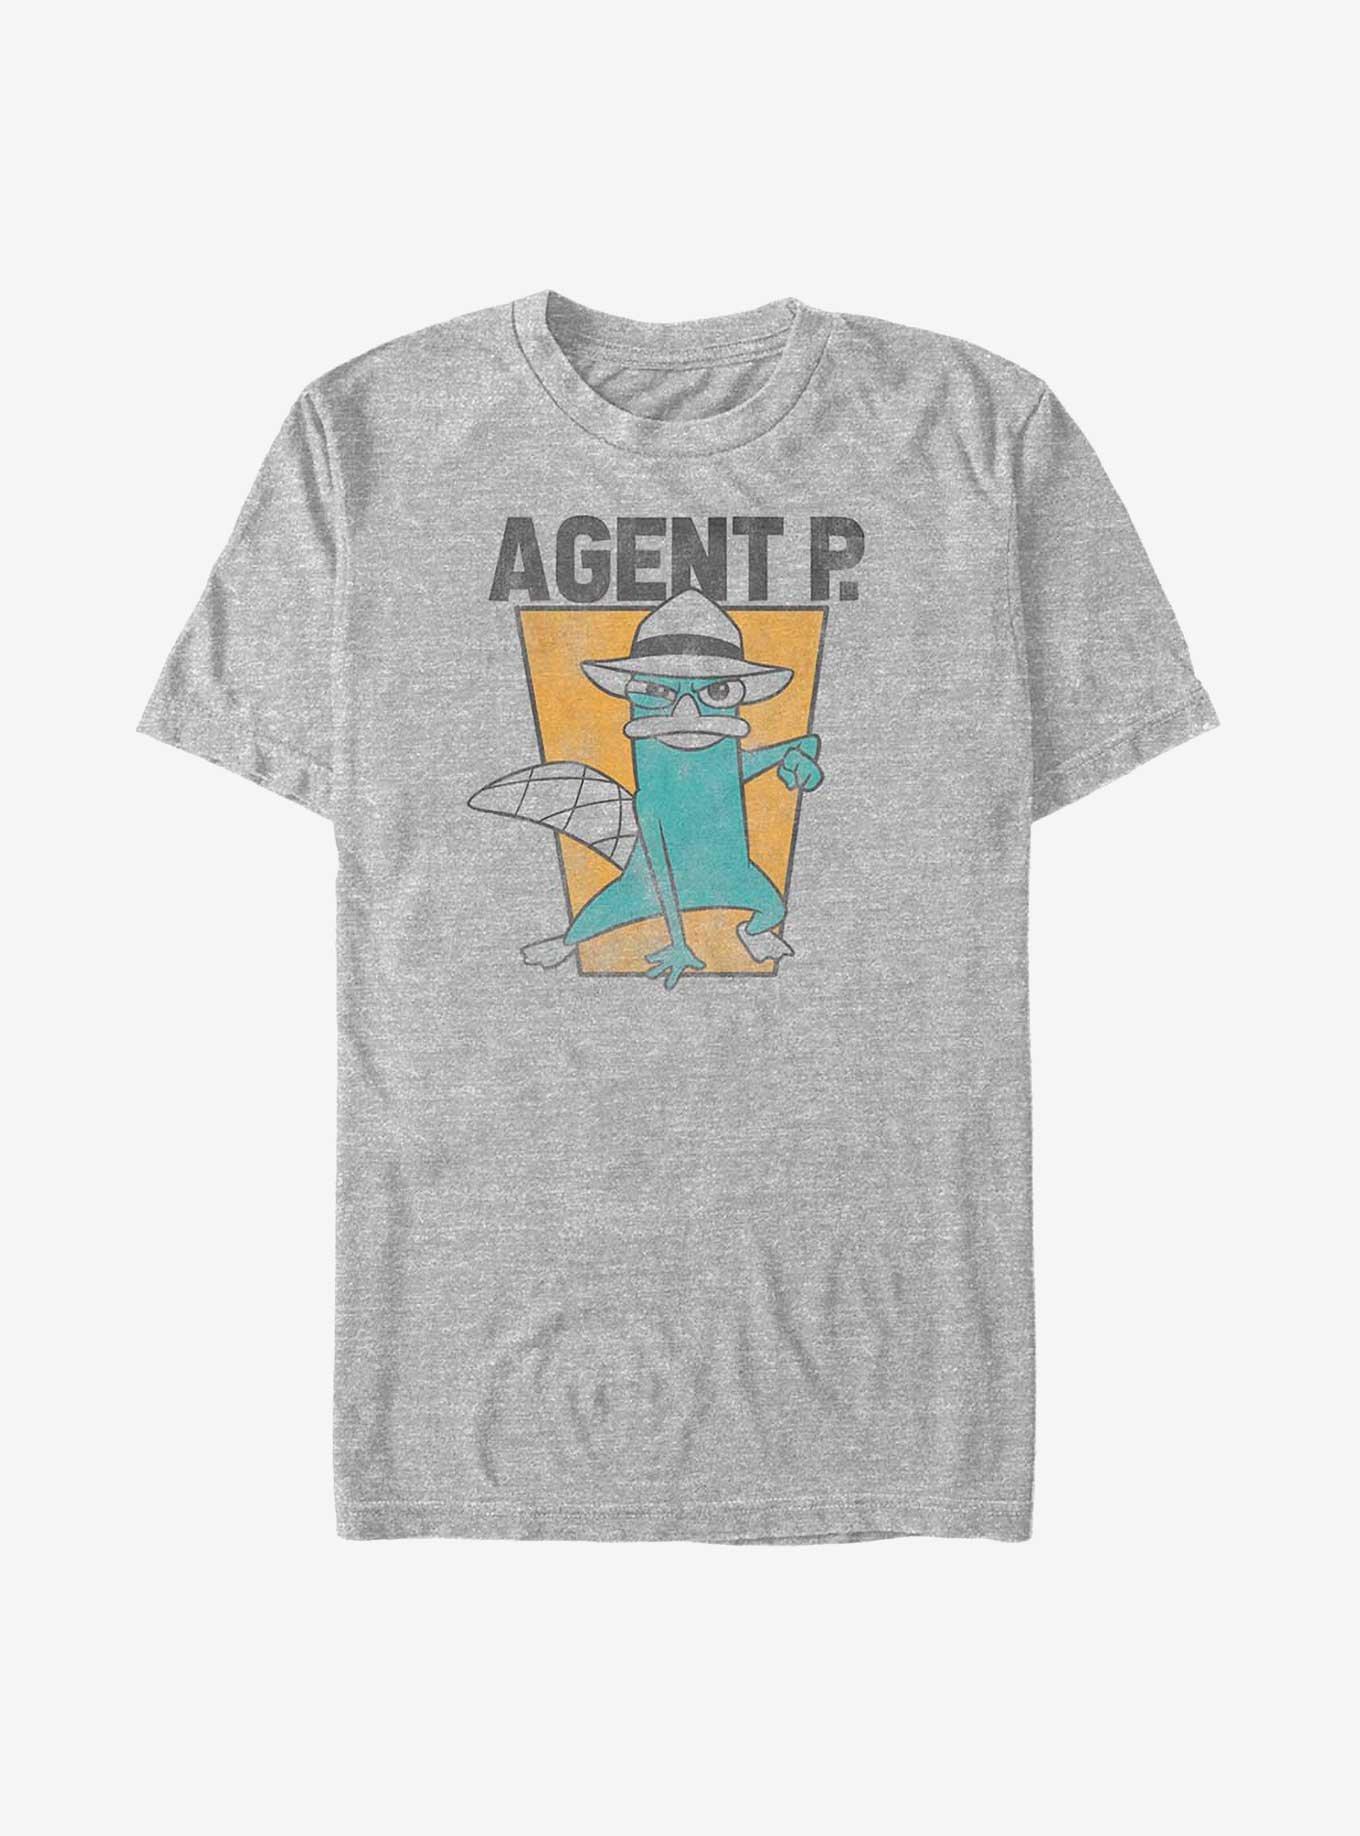 Disney Phineas And Ferb Agent P Big & Tall T-Shirt, ATH HTR, hi-res